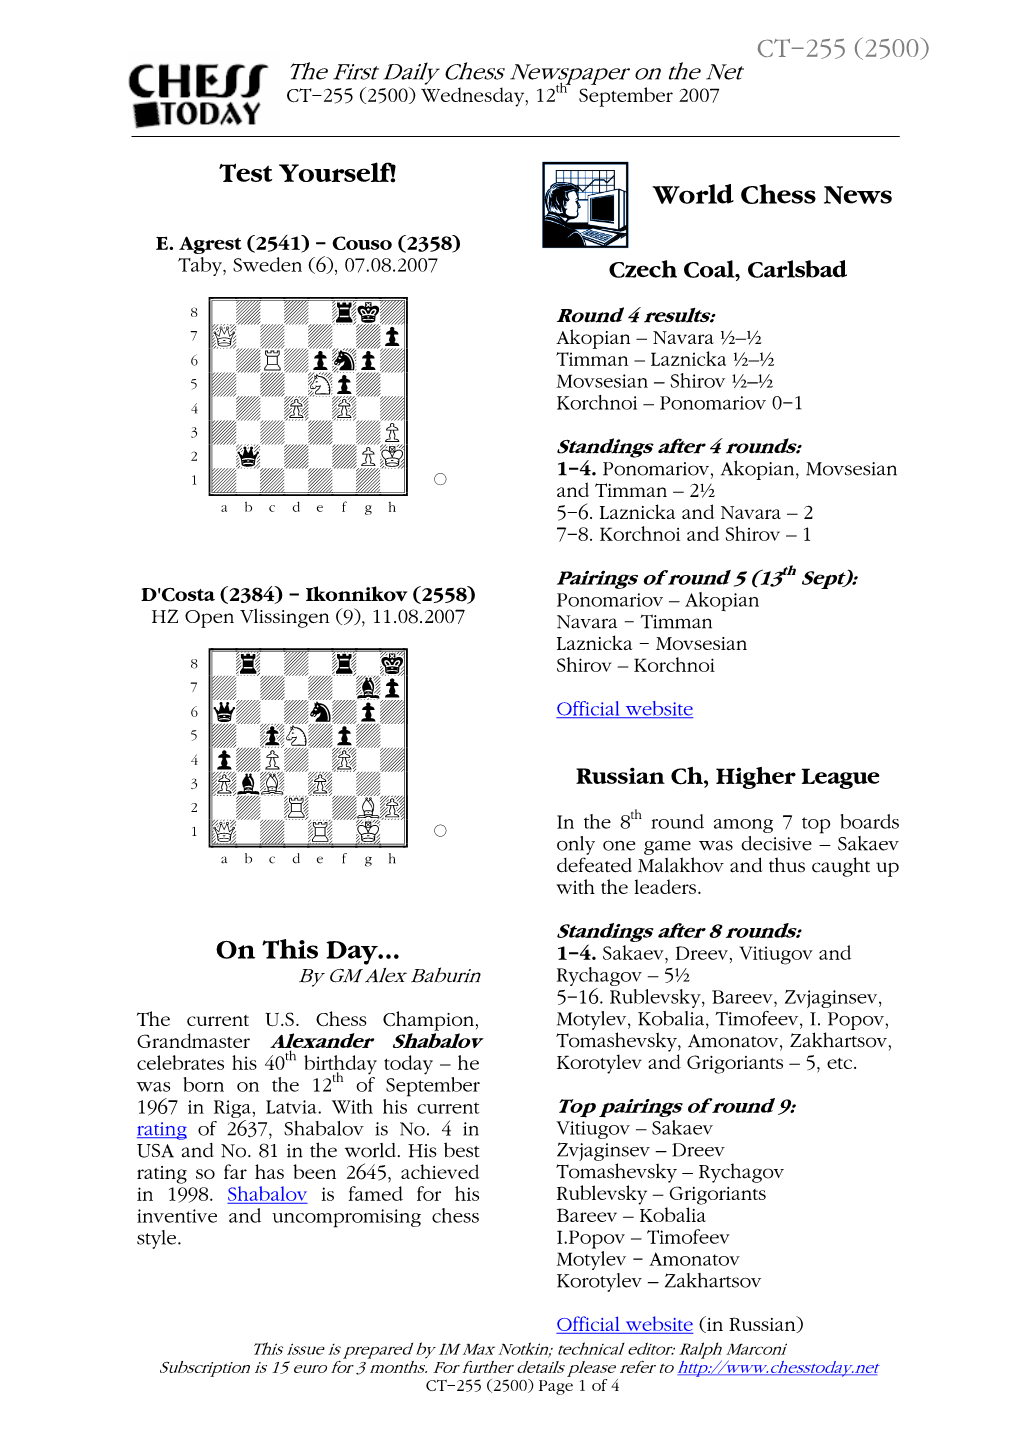 Test Yourself! on This Day... World Chess News CT-255 (2500)